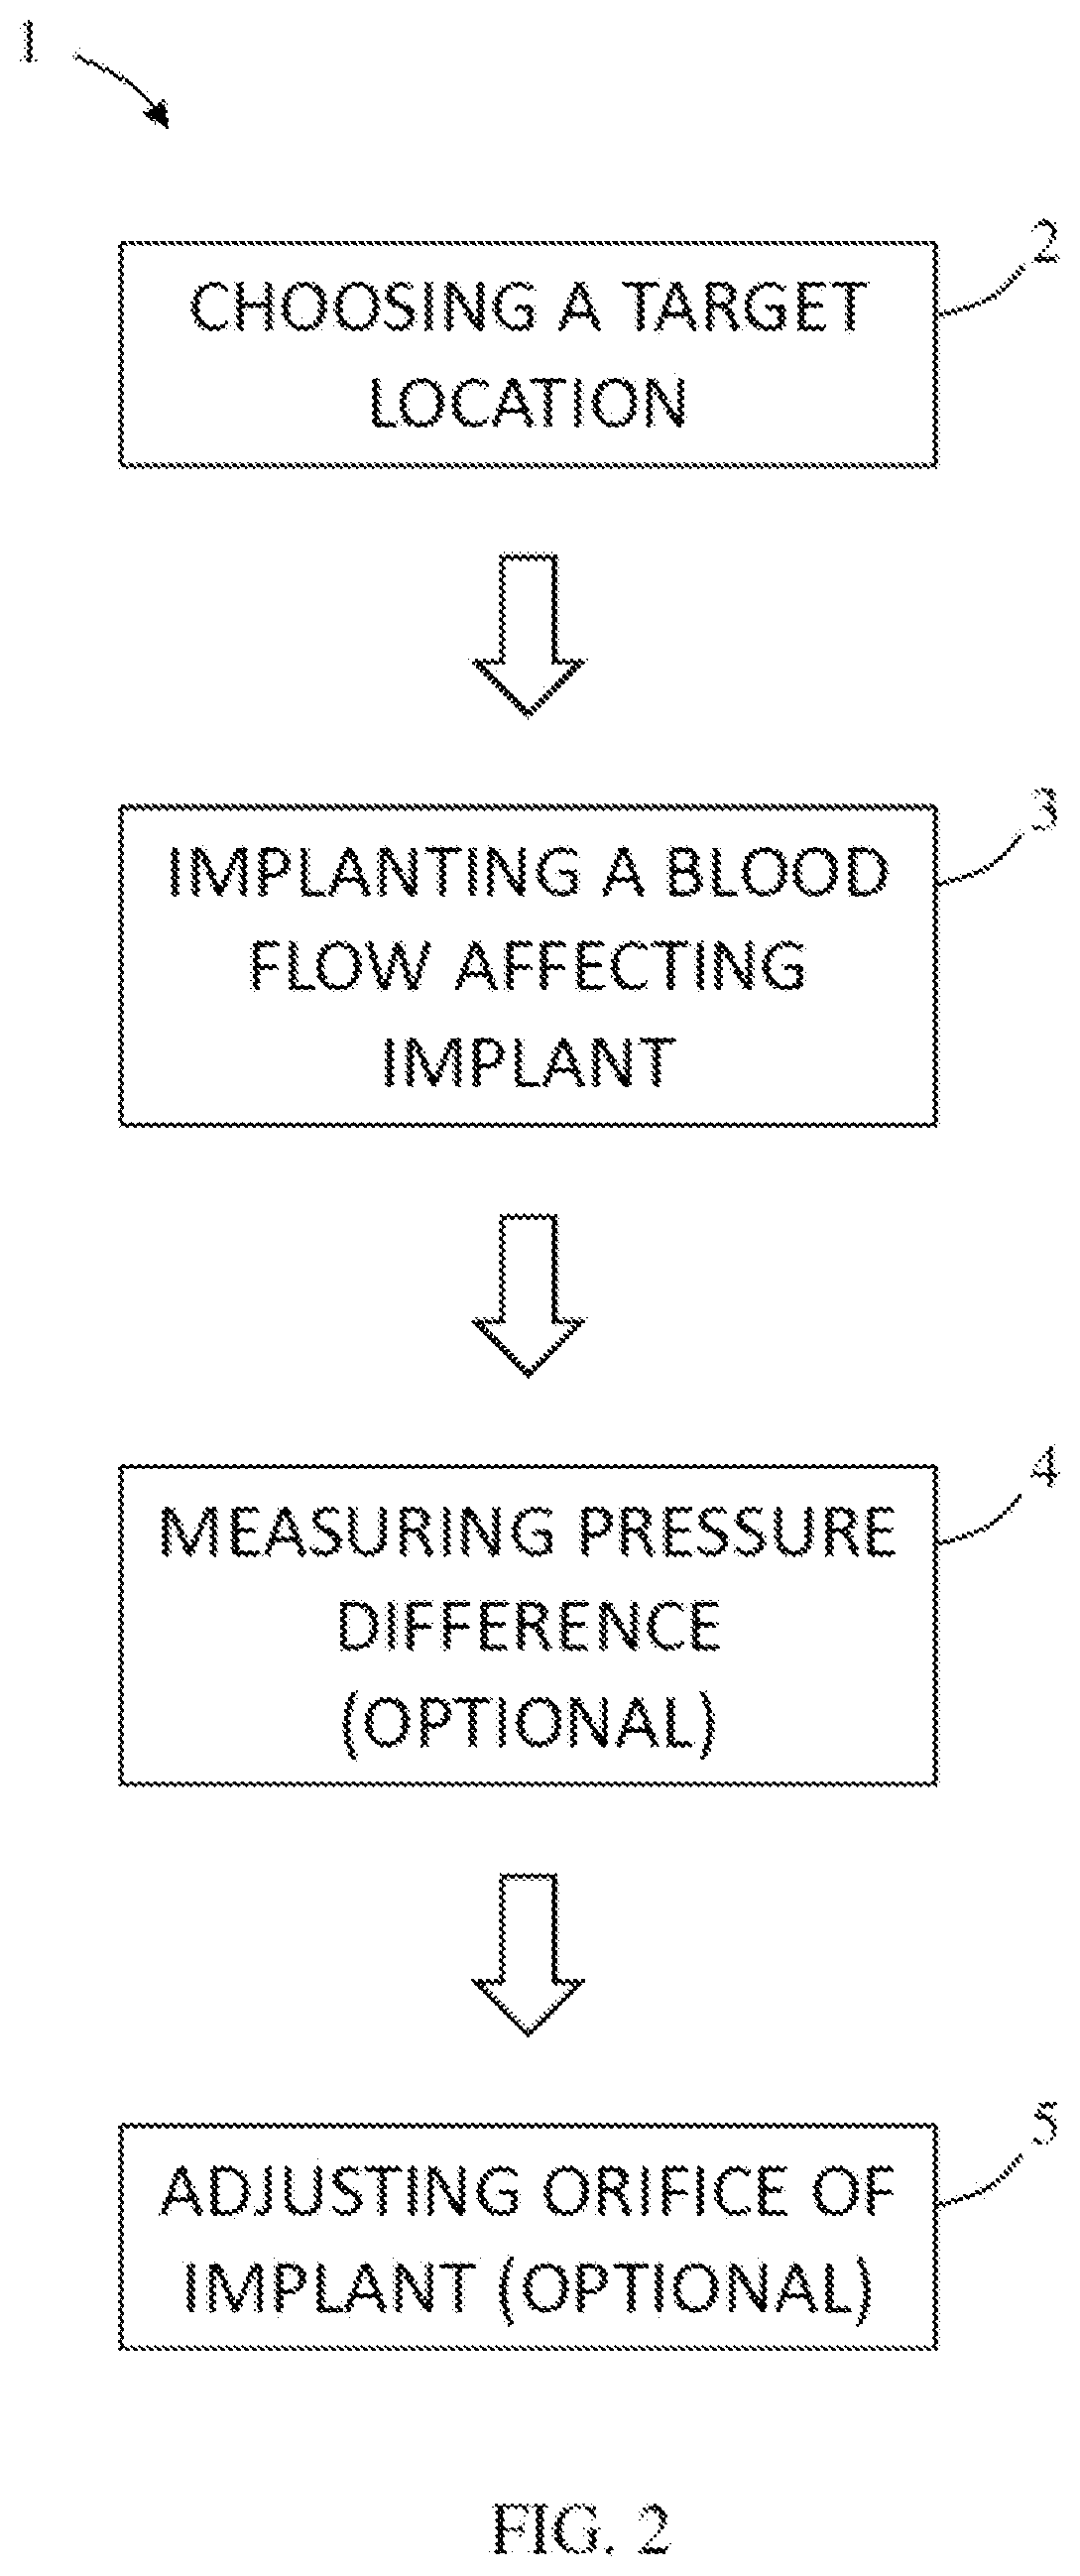 Controlling rate of blood flow to right atrium